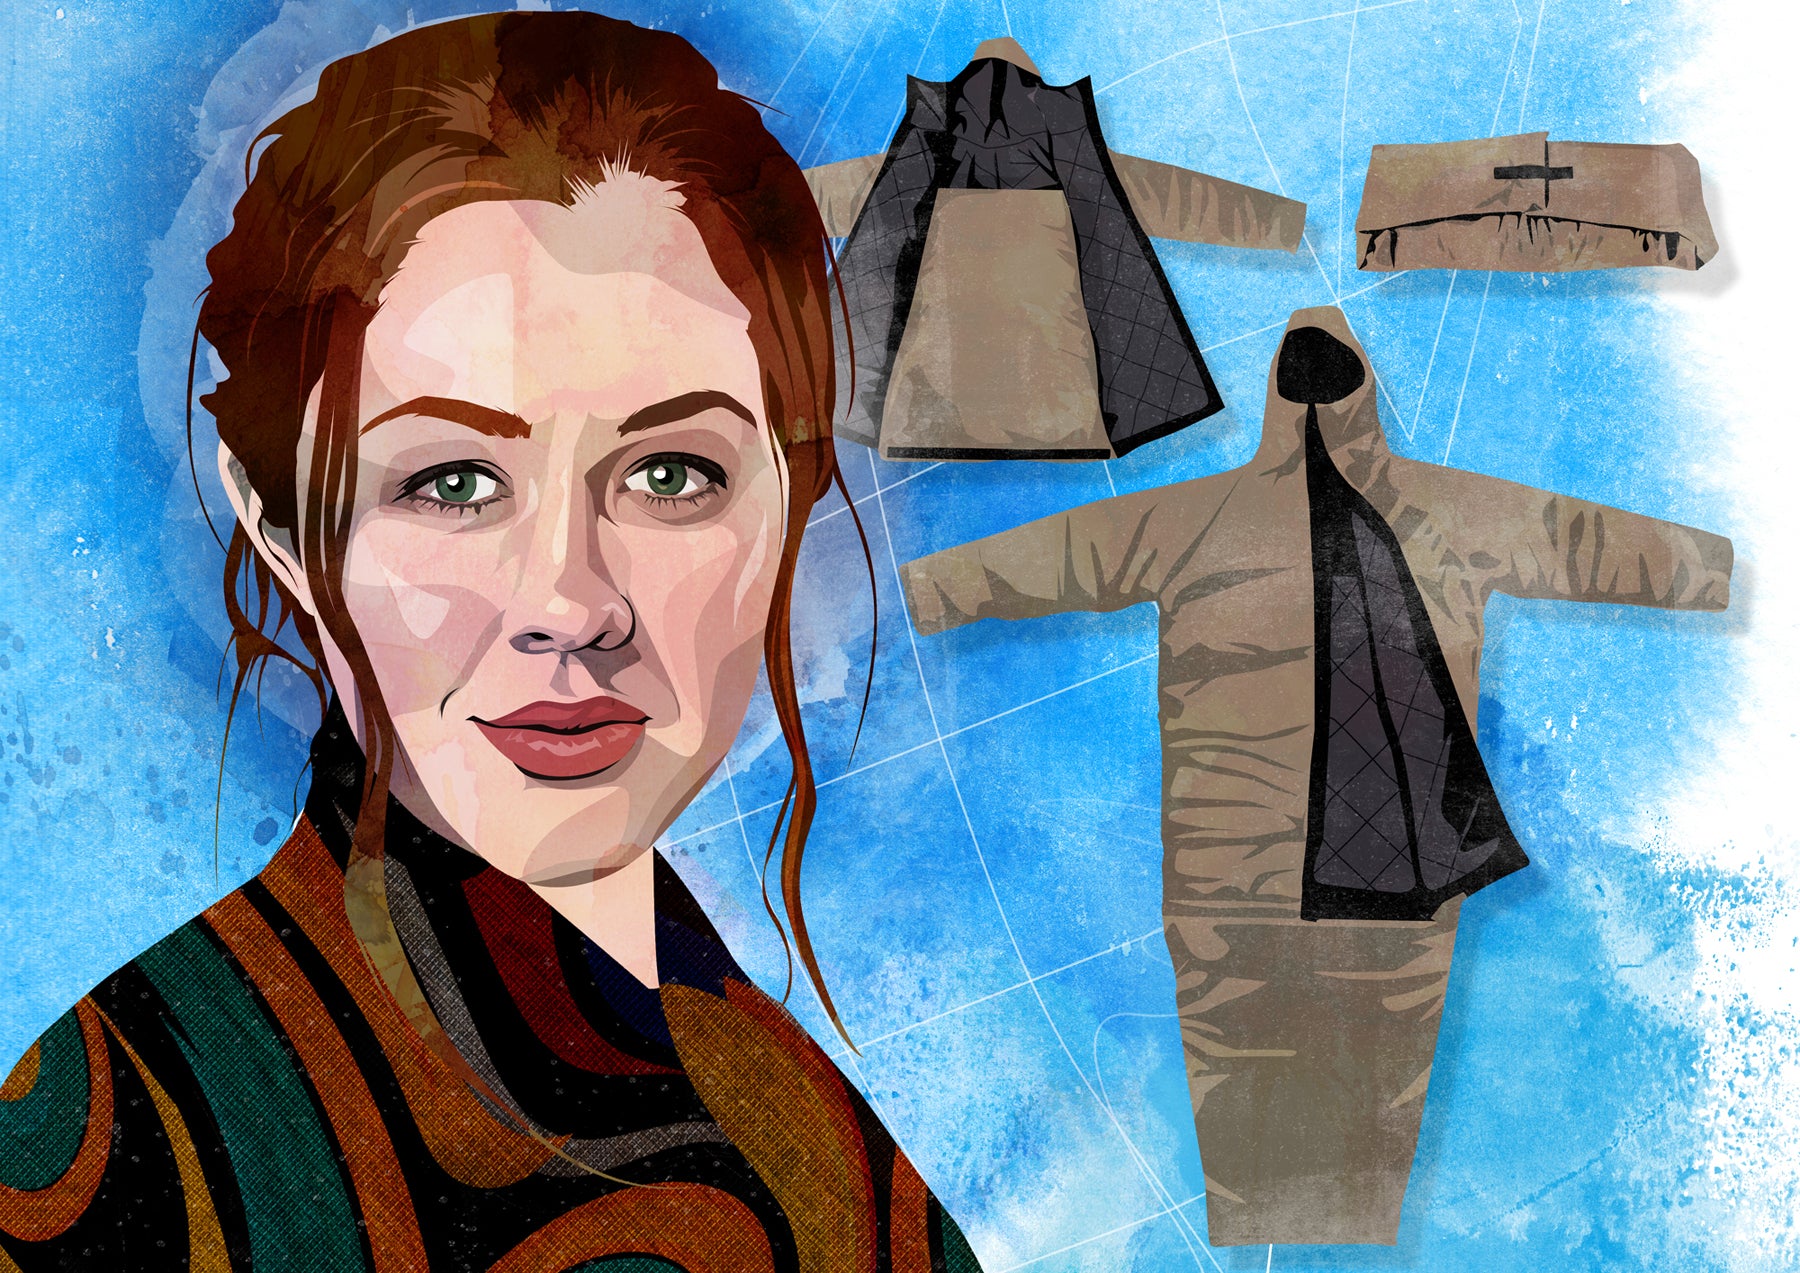 Illustration of Veronika Scott, founder of The Empowerment Project. Her EMPWR coat is visible in the background as a coat and as a sleeping bag.